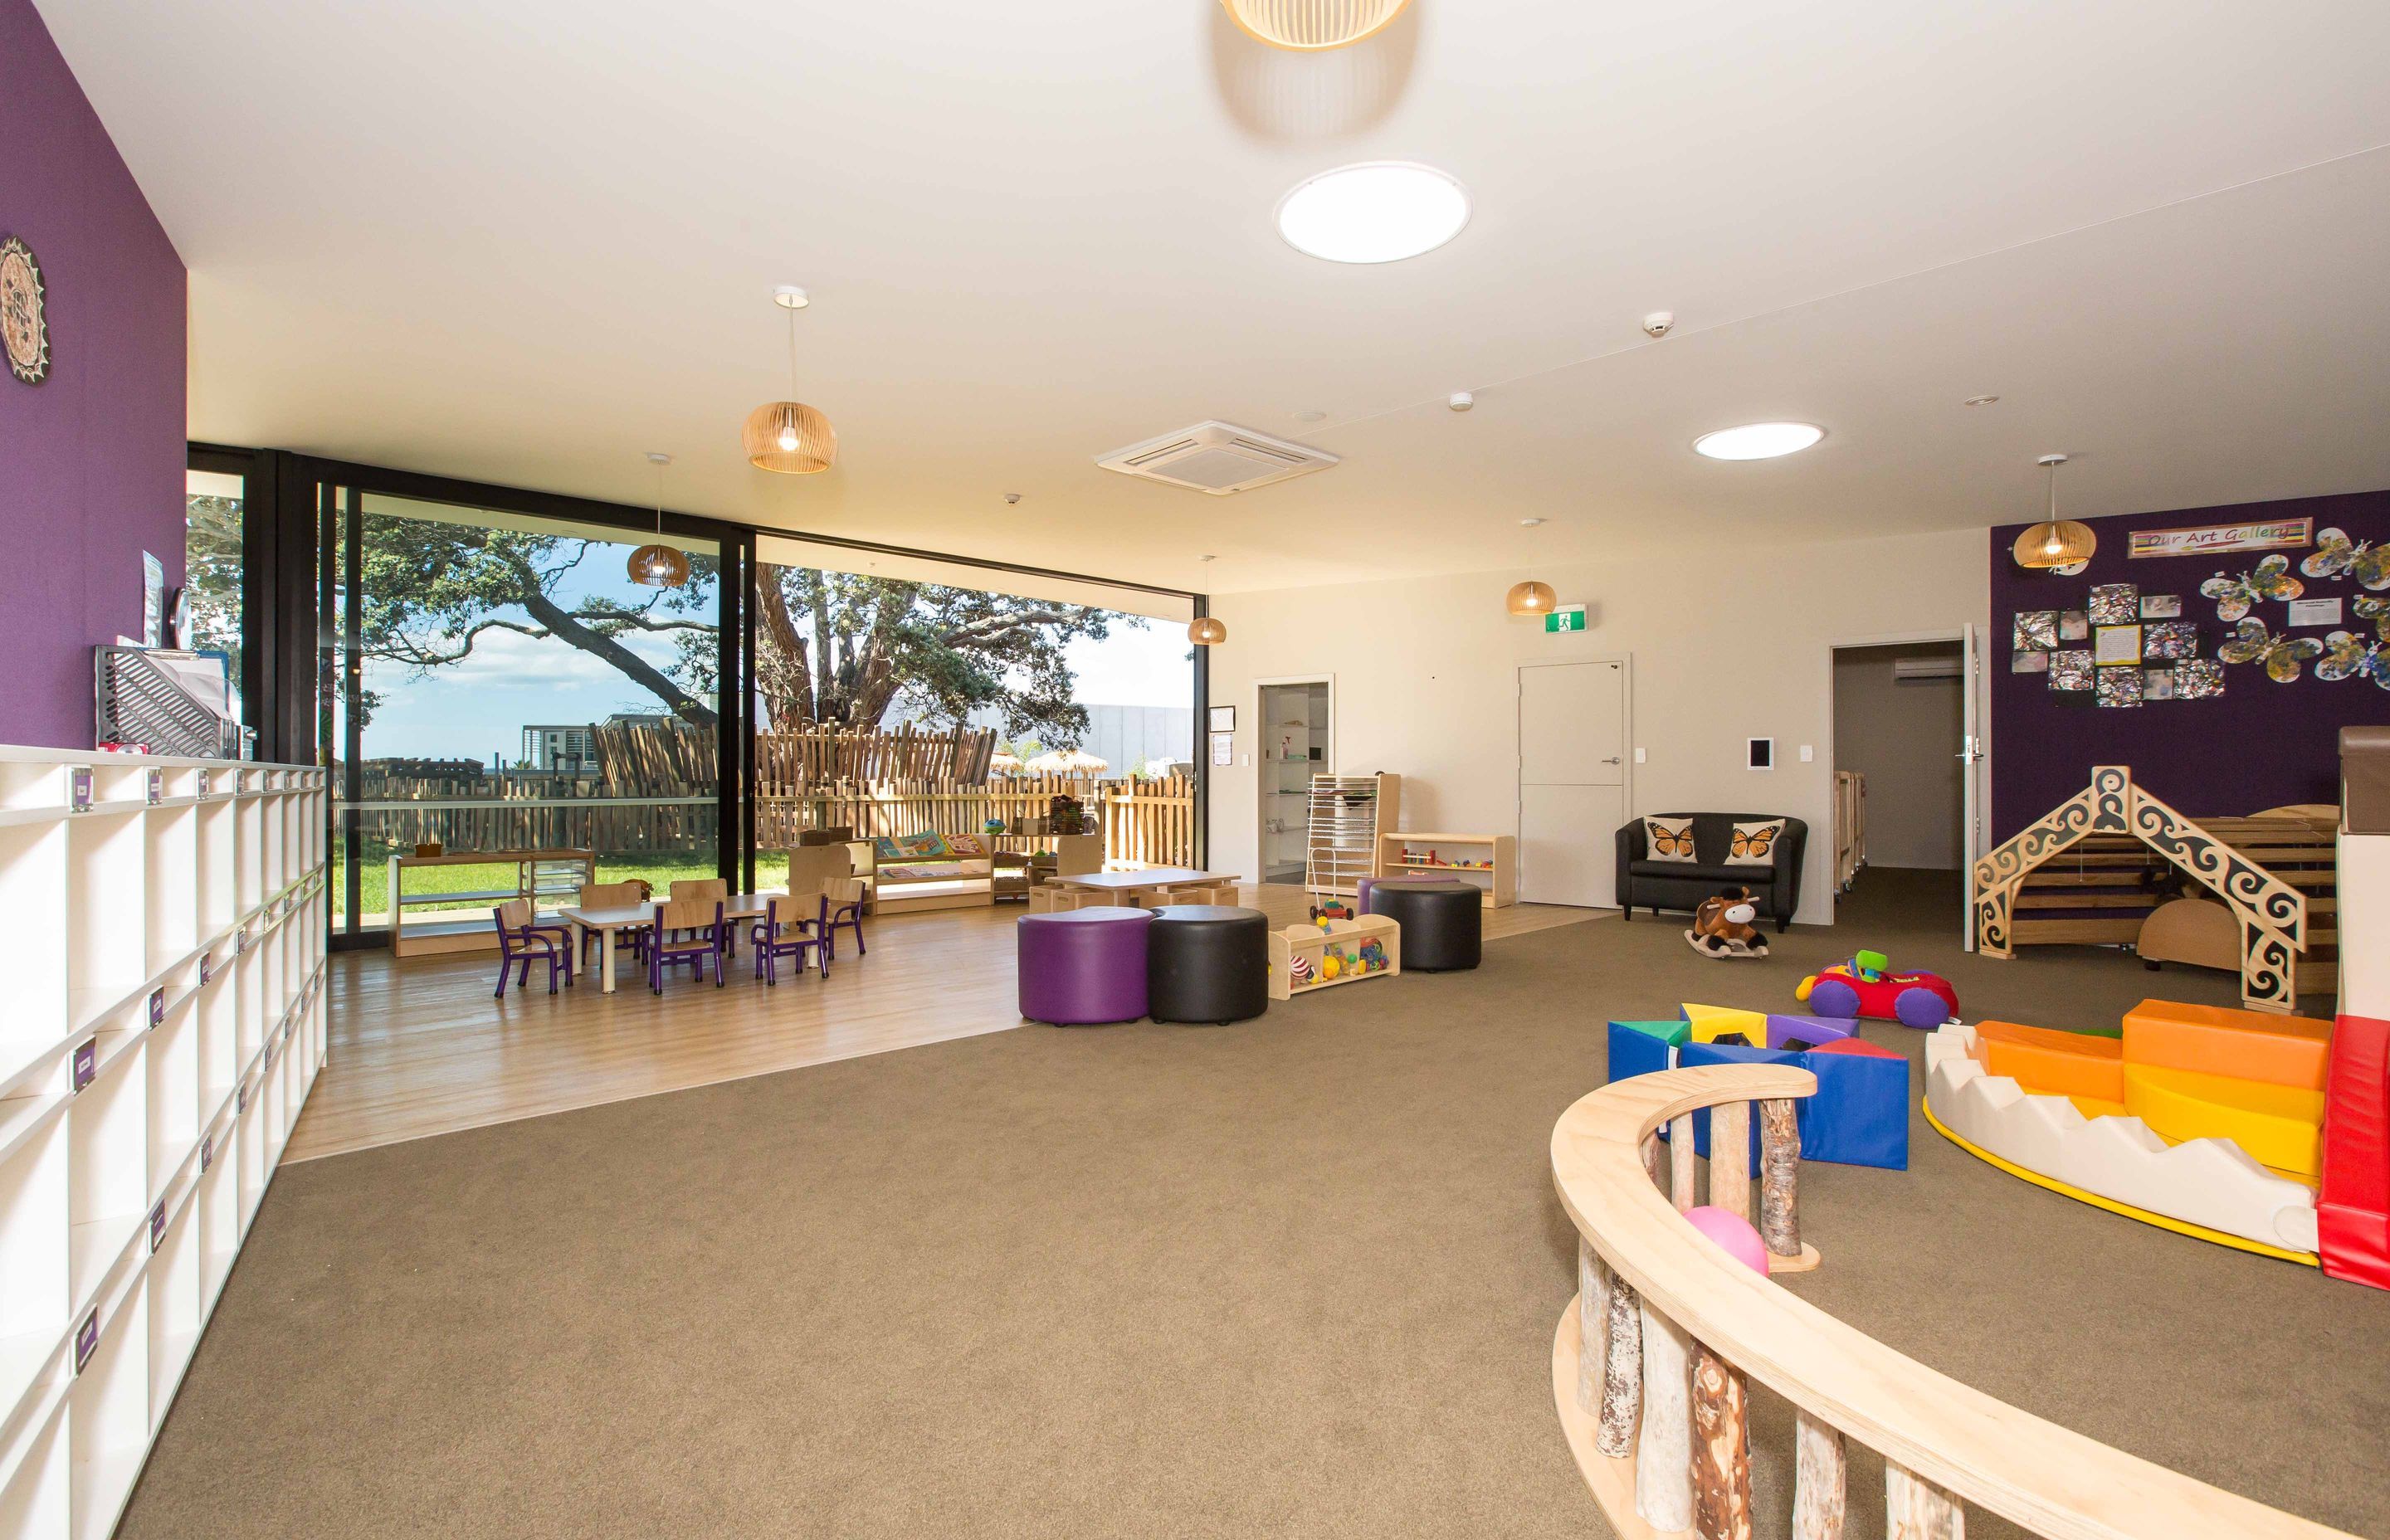 CHRYSALIS EARLY LEARNING CENTRE